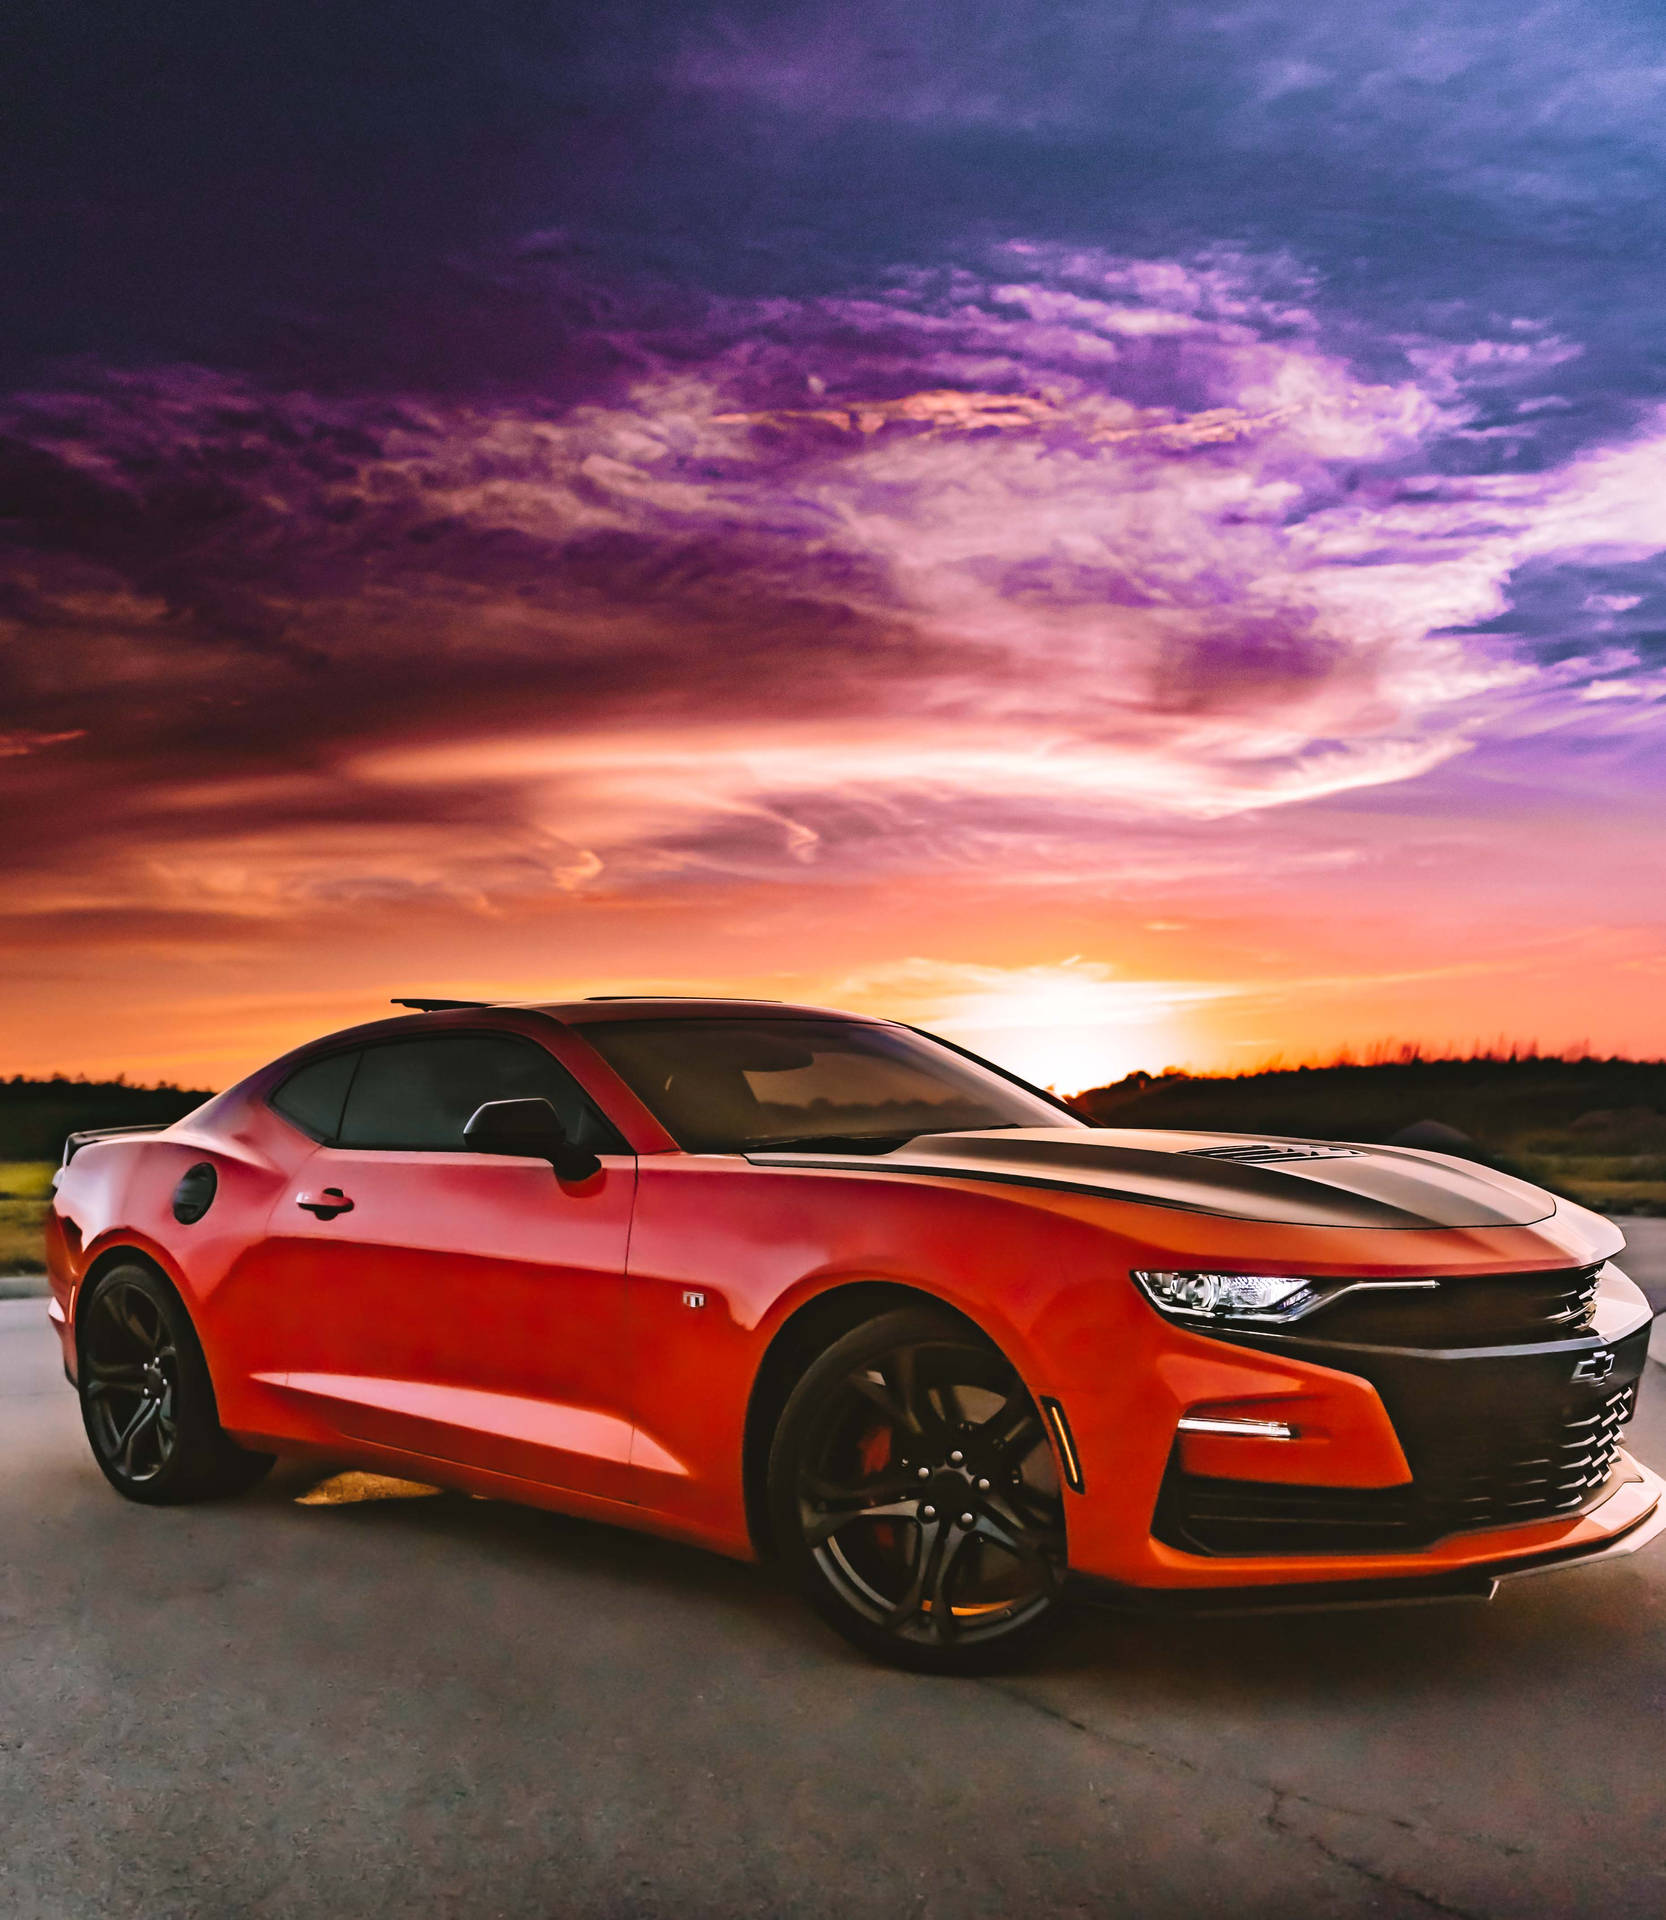 Chevrolet Car With Sunset Picture